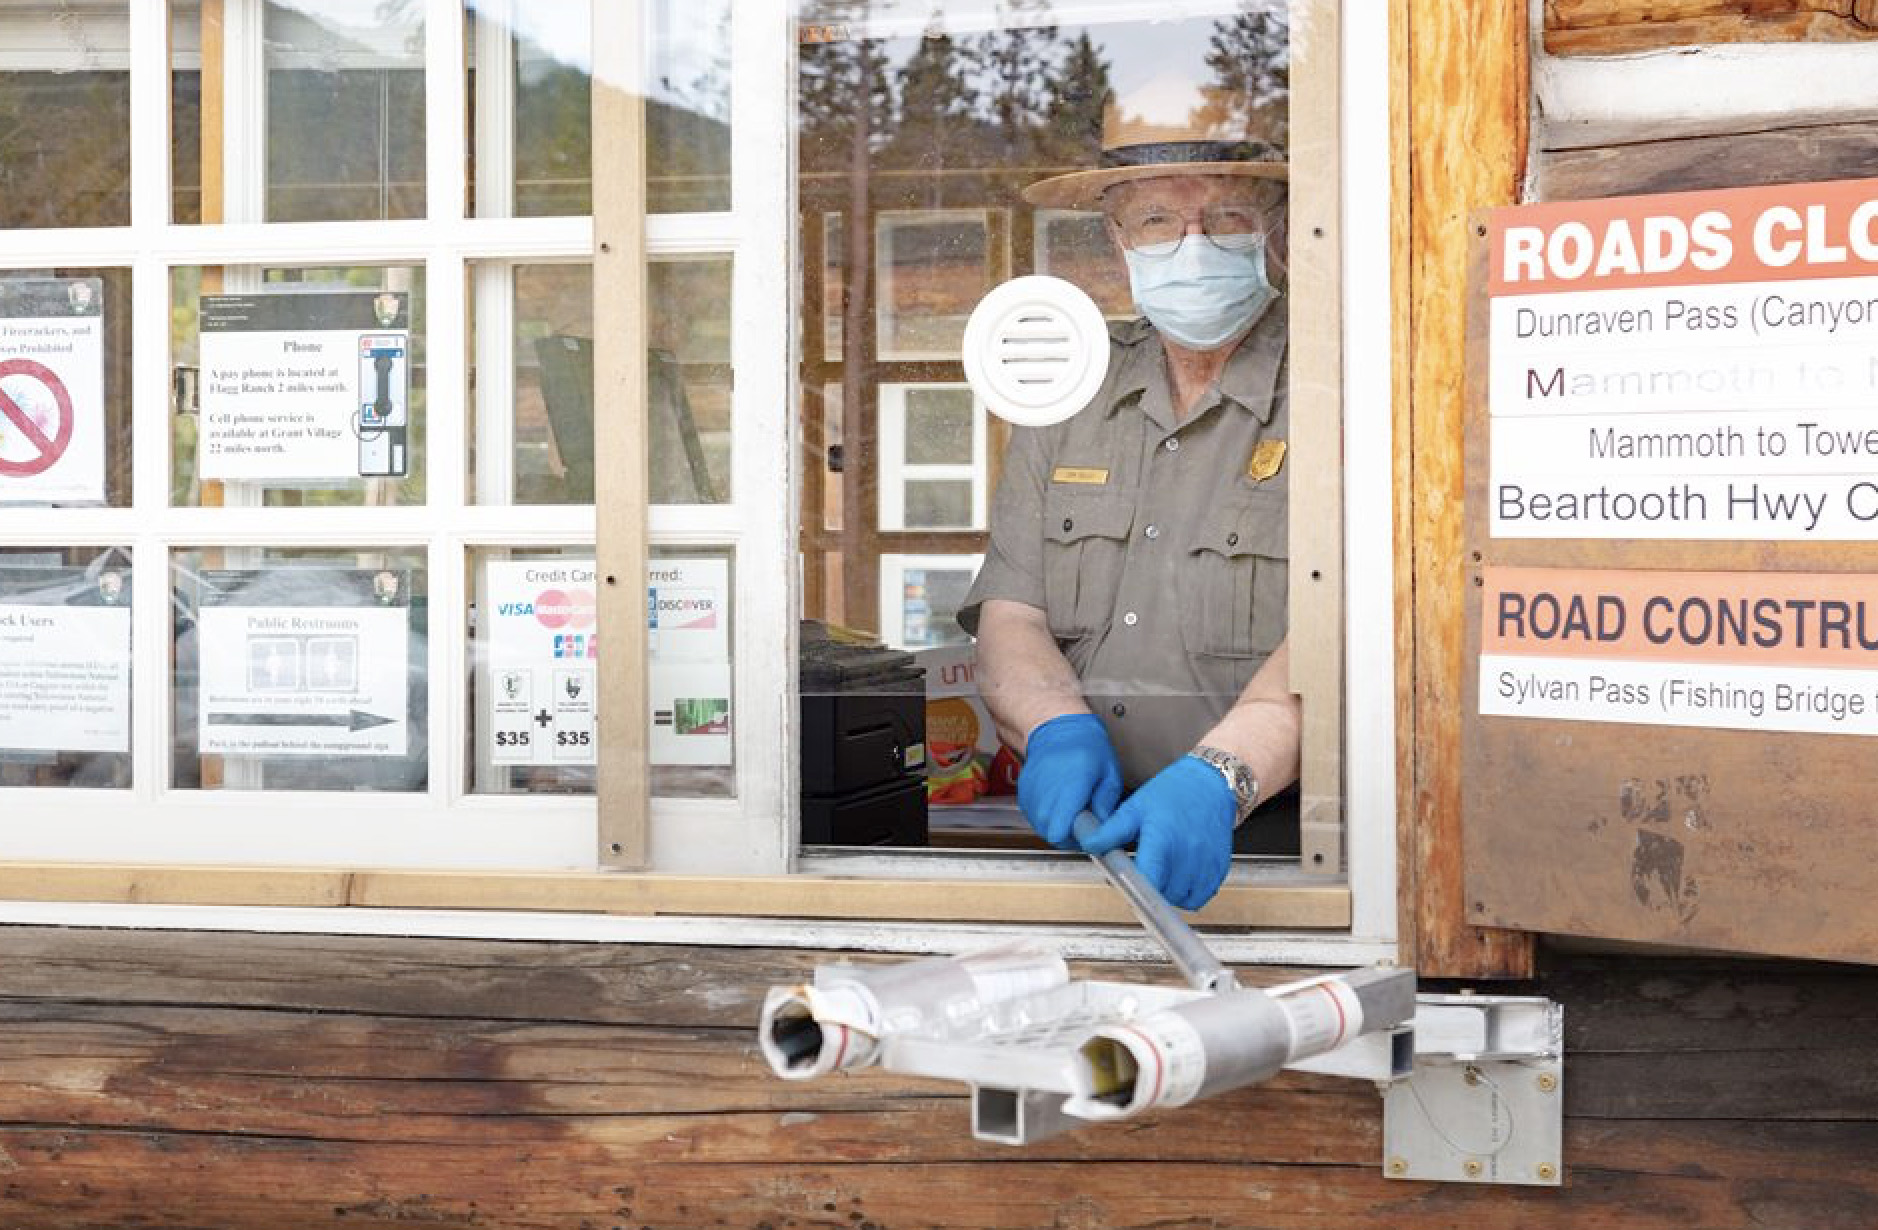 PHOTO: A park ranger with face mask and other precautions prepares to greet visitors at Yellowstone National Park ahead of Memorial Day weekend.